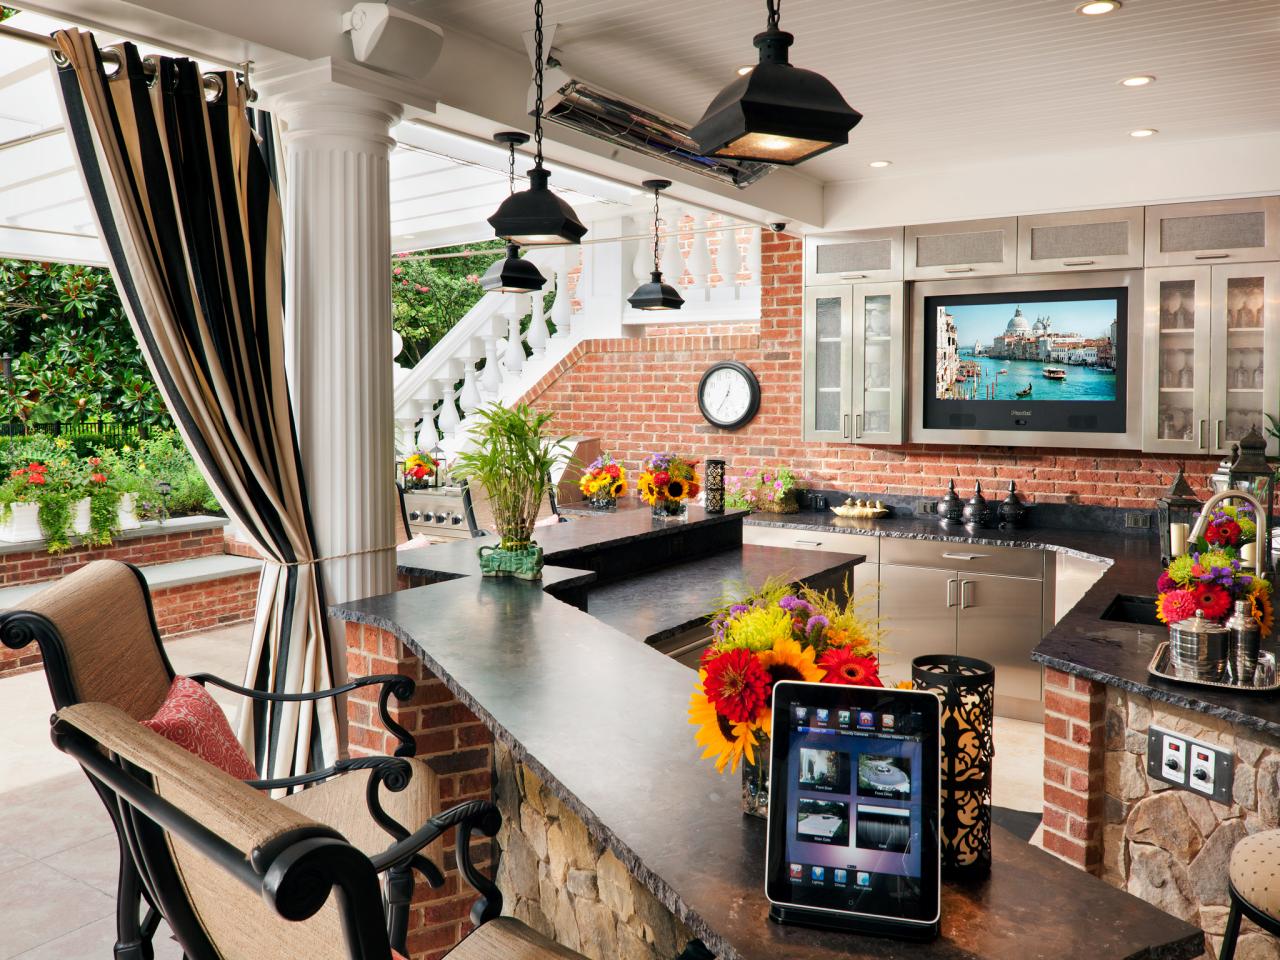 Luxury Outdoor Kitchens Pictures, Tips & Expert Ideas   HGTV